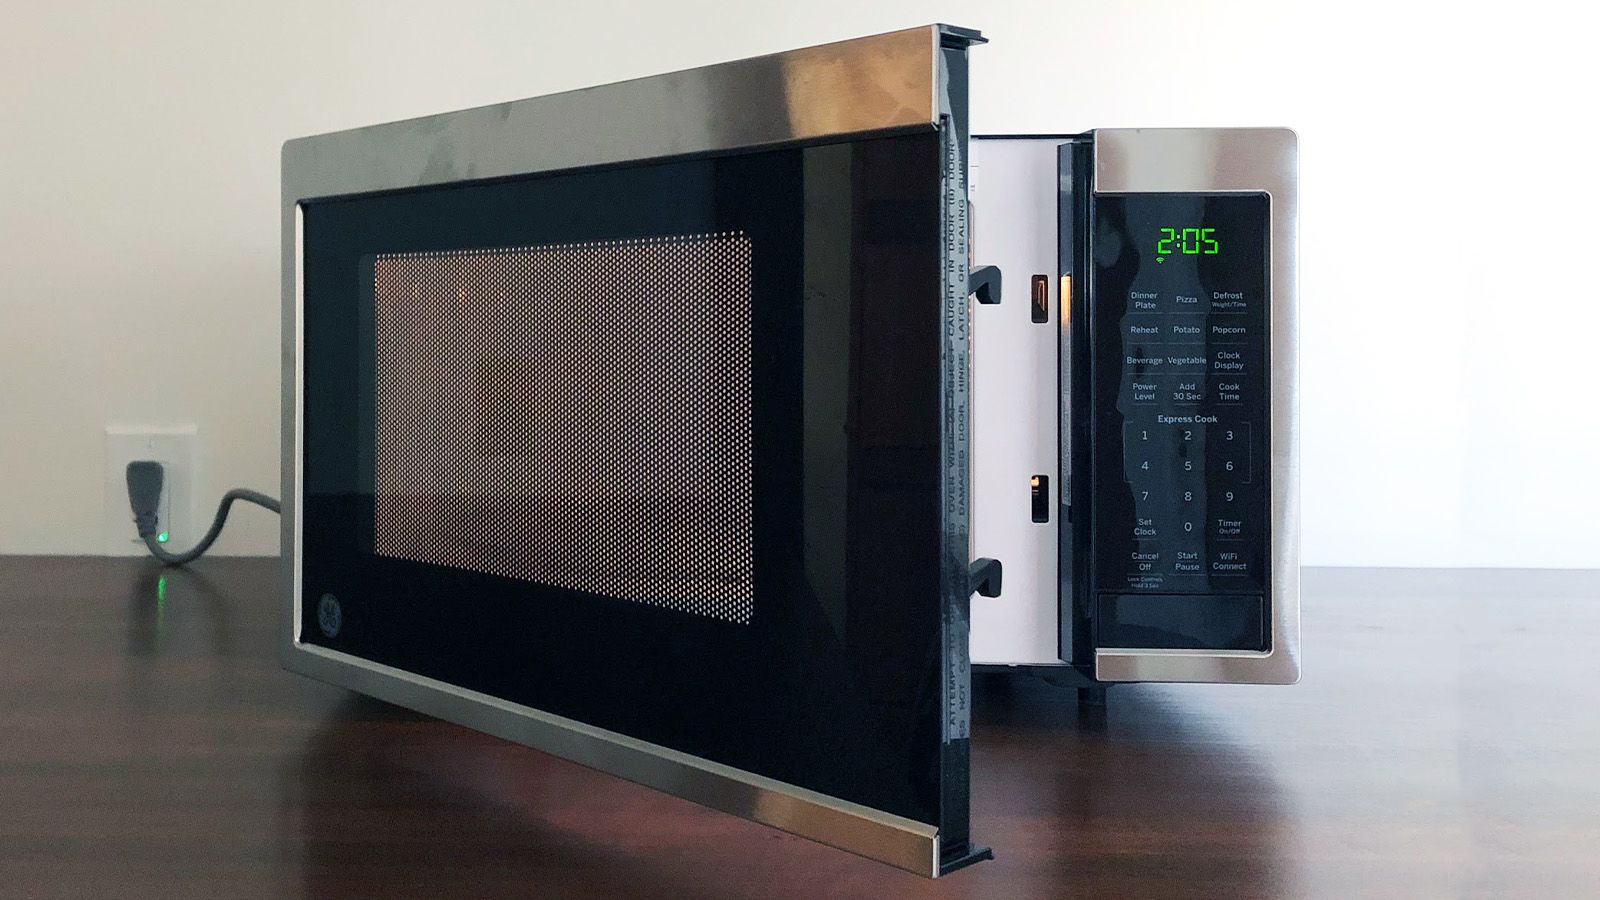 Microwave Oven Sale - Score over 50% Off (Great for College!)